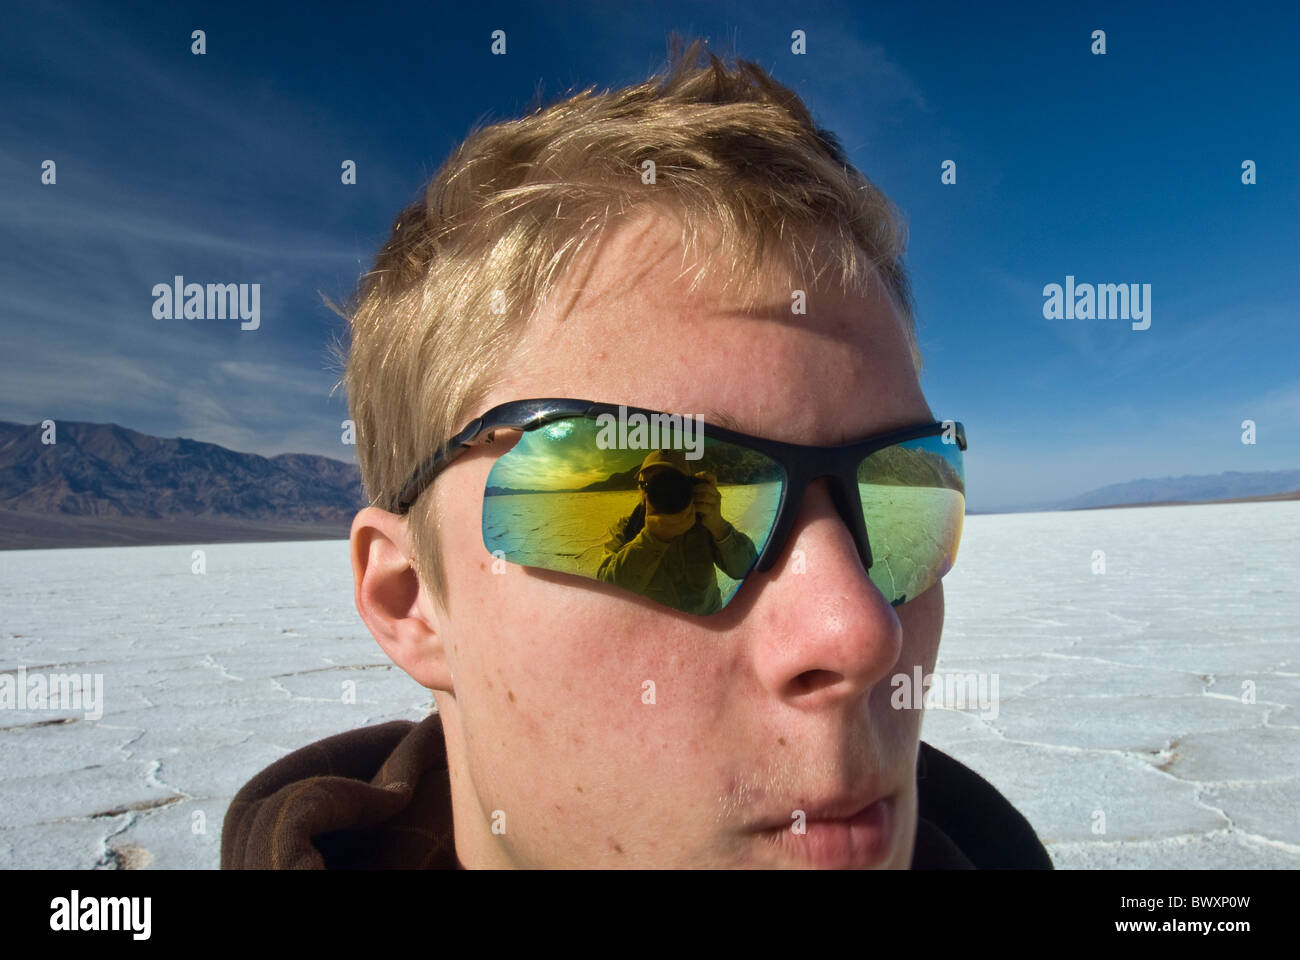 Photographer's image reflected in glasses of teenager hiker at Salt Flats,  Badwater area, winter, Death Valley, California, USA Stock Photo